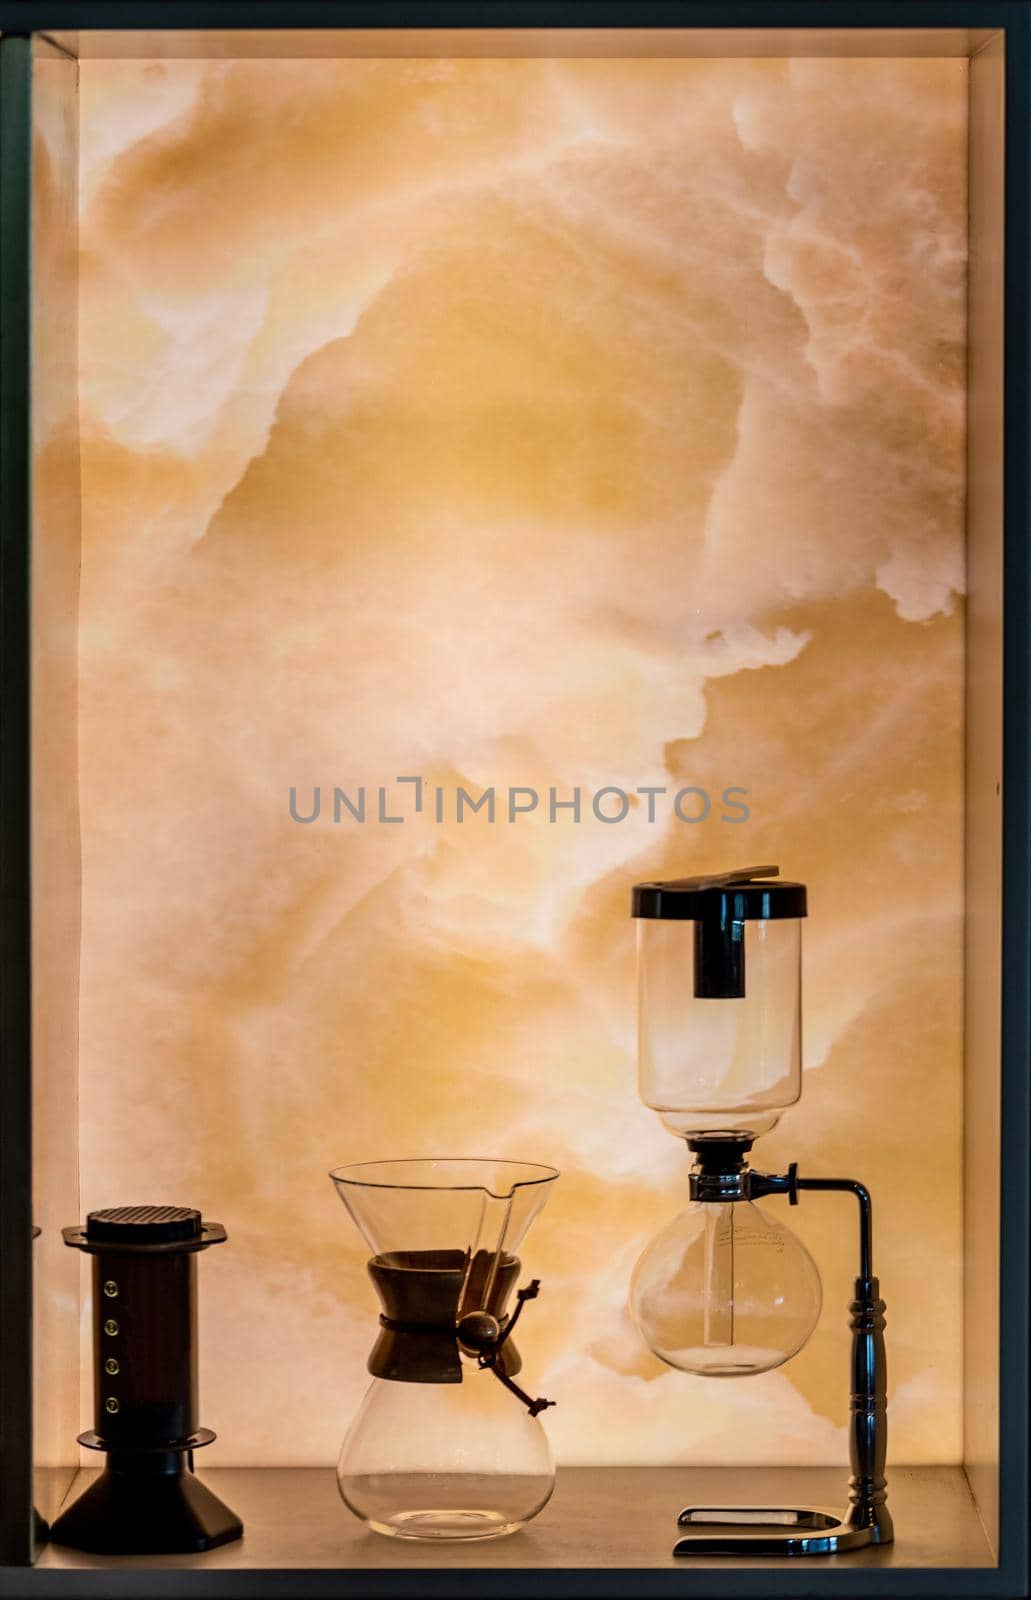 Alternative third generation coffee brewing equipments standing on the illuminated shelf. Selective focus by Sonat